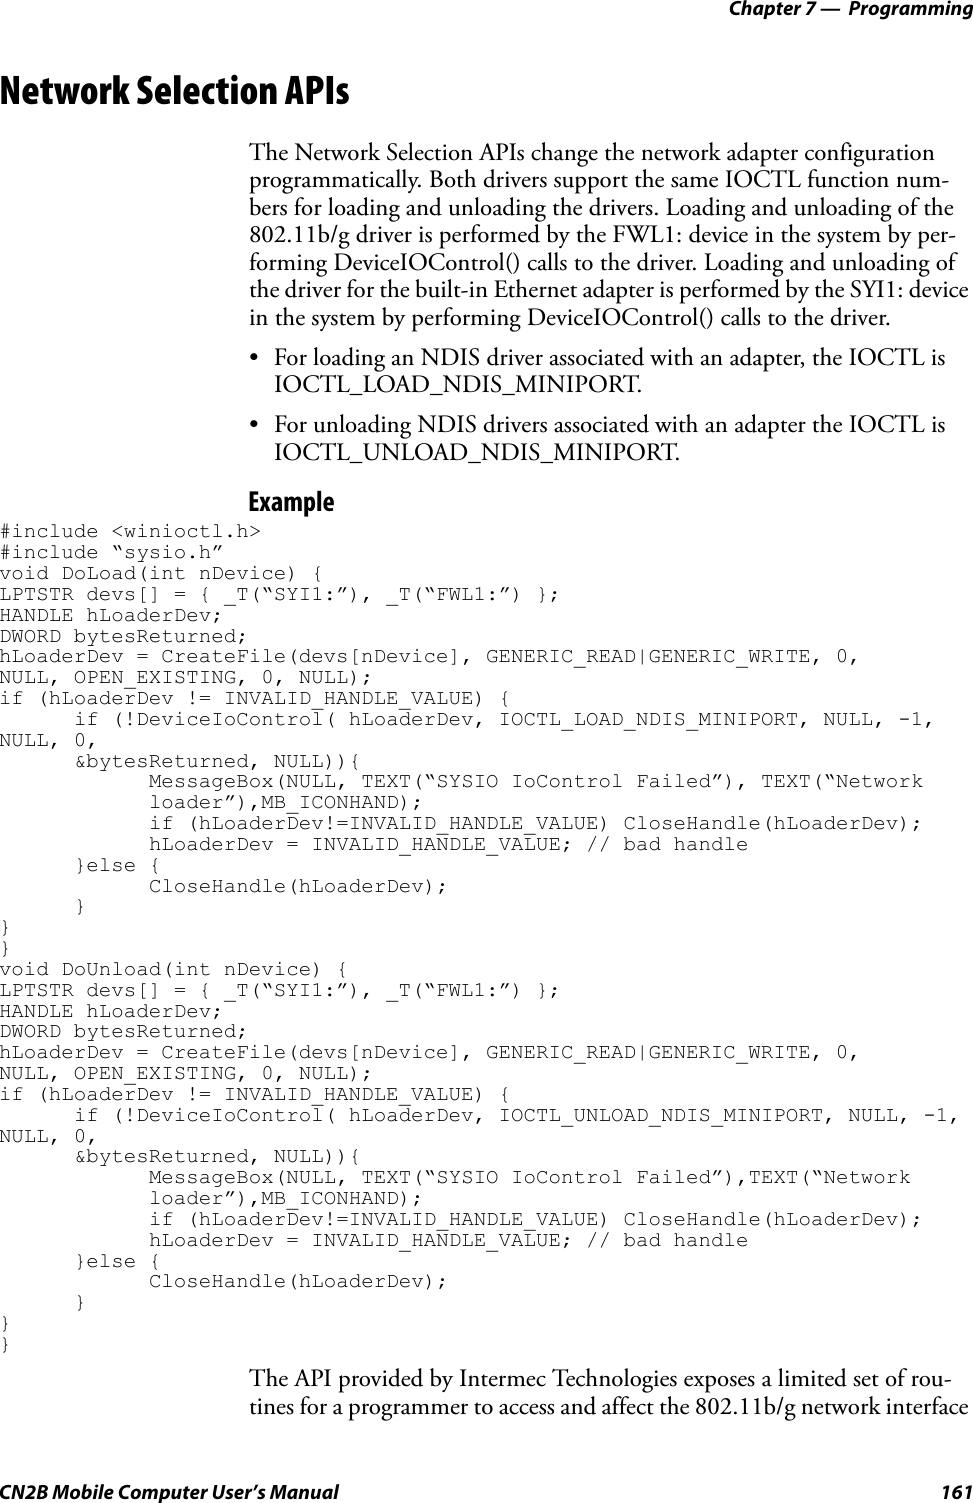 Chapter 7 —  ProgrammingCN2B Mobile Computer User’s Manual 161Network Selection APIsThe Network Selection APIs change the network adapter configuration programmatically. Both drivers support the same IOCTL function num-bers for loading and unloading the drivers. Loading and unloading of the 802.11b/g driver is performed by the FWL1: device in the system by per-forming DeviceIOControl() calls to the driver. Loading and unloading of the driver for the built-in Ethernet adapter is performed by the SYI1: device in the system by performing DeviceIOControl() calls to the driver. • For loading an NDIS driver associated with an adapter, the IOCTL is IOCTL_LOAD_NDIS_MINIPORT.• For unloading NDIS drivers associated with an adapter the IOCTL is IOCTL_UNLOAD_NDIS_MINIPORT.Example#include &lt;winioctl.h&gt;#include “sysio.h”void DoLoad(int nDevice) { LPTSTR devs[] = { _T(“SYI1:”), _T(“FWL1:”) };HANDLE hLoaderDev;DWORD bytesReturned;hLoaderDev = CreateFile(devs[nDevice], GENERIC_READ|GENERIC_WRITE, 0,NULL, OPEN_EXISTING, 0, NULL);if (hLoaderDev != INVALID_HANDLE_VALUE) {if (!DeviceIoControl( hLoaderDev, IOCTL_LOAD_NDIS_MINIPORT, NULL, -1, NULL, 0, &amp;bytesReturned, NULL)){MessageBox(NULL, TEXT(“SYSIO IoControl Failed”), TEXT(“Network loader”),MB_ICONHAND);if (hLoaderDev!=INVALID_HANDLE_VALUE) CloseHandle(hLoaderDev);hLoaderDev = INVALID_HANDLE_VALUE; // bad handle}else {CloseHandle(hLoaderDev);}}}void DoUnload(int nDevice) {LPTSTR devs[] = { _T(“SYI1:”), _T(“FWL1:”) };HANDLE hLoaderDev;DWORD bytesReturned;hLoaderDev = CreateFile(devs[nDevice], GENERIC_READ|GENERIC_WRITE, 0,NULL, OPEN_EXISTING, 0, NULL);if (hLoaderDev != INVALID_HANDLE_VALUE) {if (!DeviceIoControl( hLoaderDev, IOCTL_UNLOAD_NDIS_MINIPORT, NULL, -1, NULL, 0, &amp;bytesReturned, NULL)){MessageBox(NULL, TEXT(“SYSIO IoControl Failed”),TEXT(“Network loader”),MB_ICONHAND);if (hLoaderDev!=INVALID_HANDLE_VALUE) CloseHandle(hLoaderDev);hLoaderDev = INVALID_HANDLE_VALUE; // bad handle}else {CloseHandle(hLoaderDev);}}}The API provided by Intermec Technologies exposes a limited set of rou-tines for a programmer to access and affect the 802.11b/g network interface 